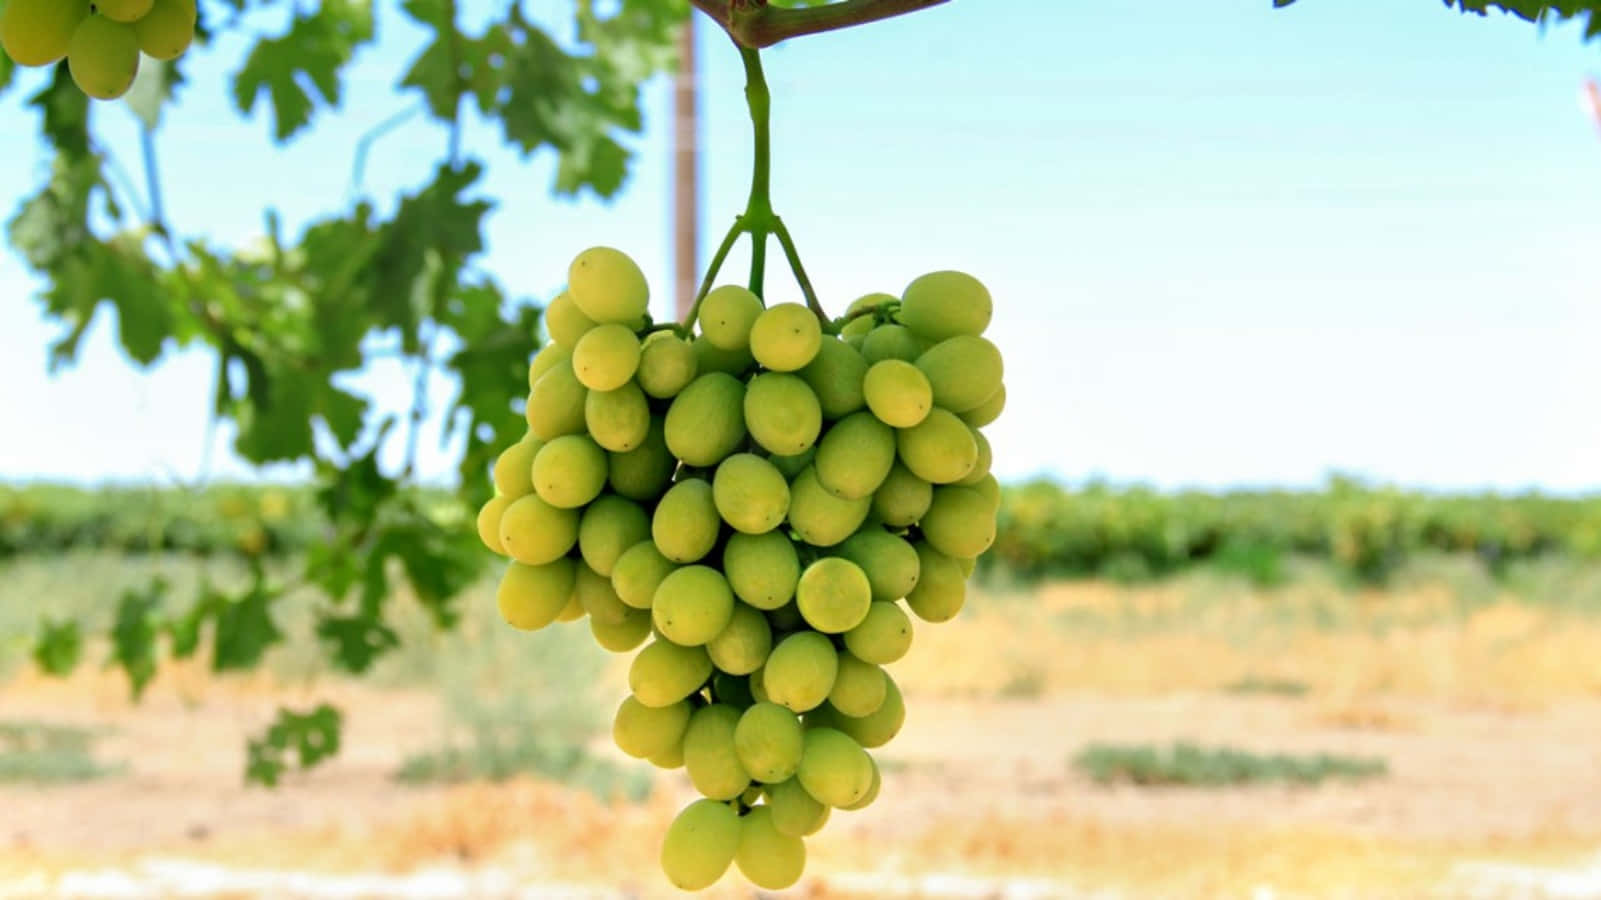 A Bunch Of Green Grapes Hanging From A Tree